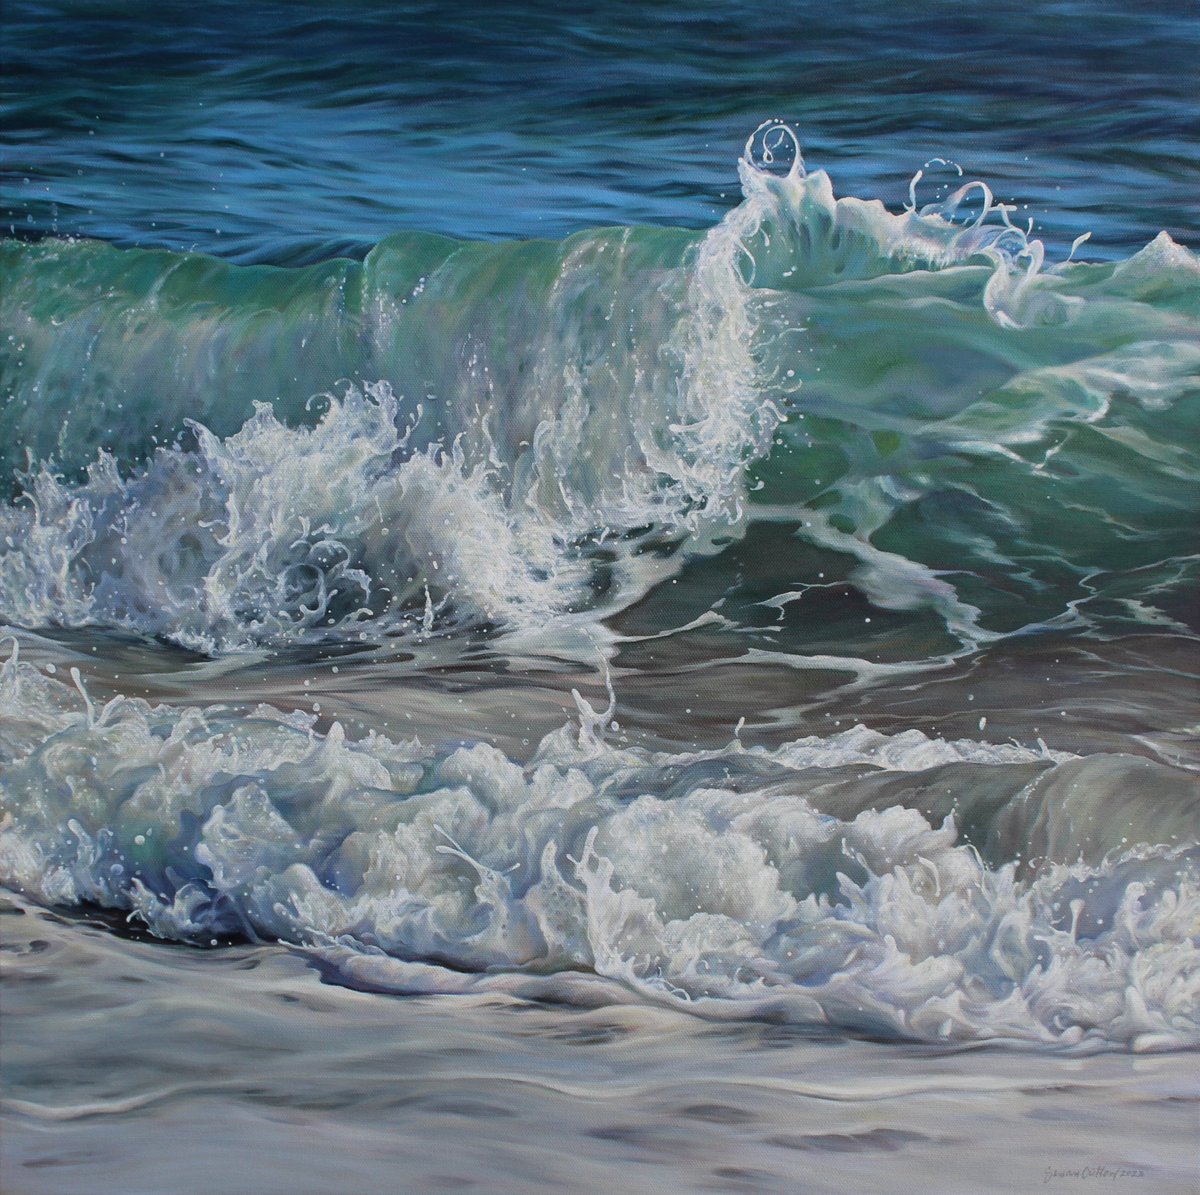 And…. It’s finished! But still needs a title 🤔
24x24 in.
oil on canvas
.
#seascapepainting #wave